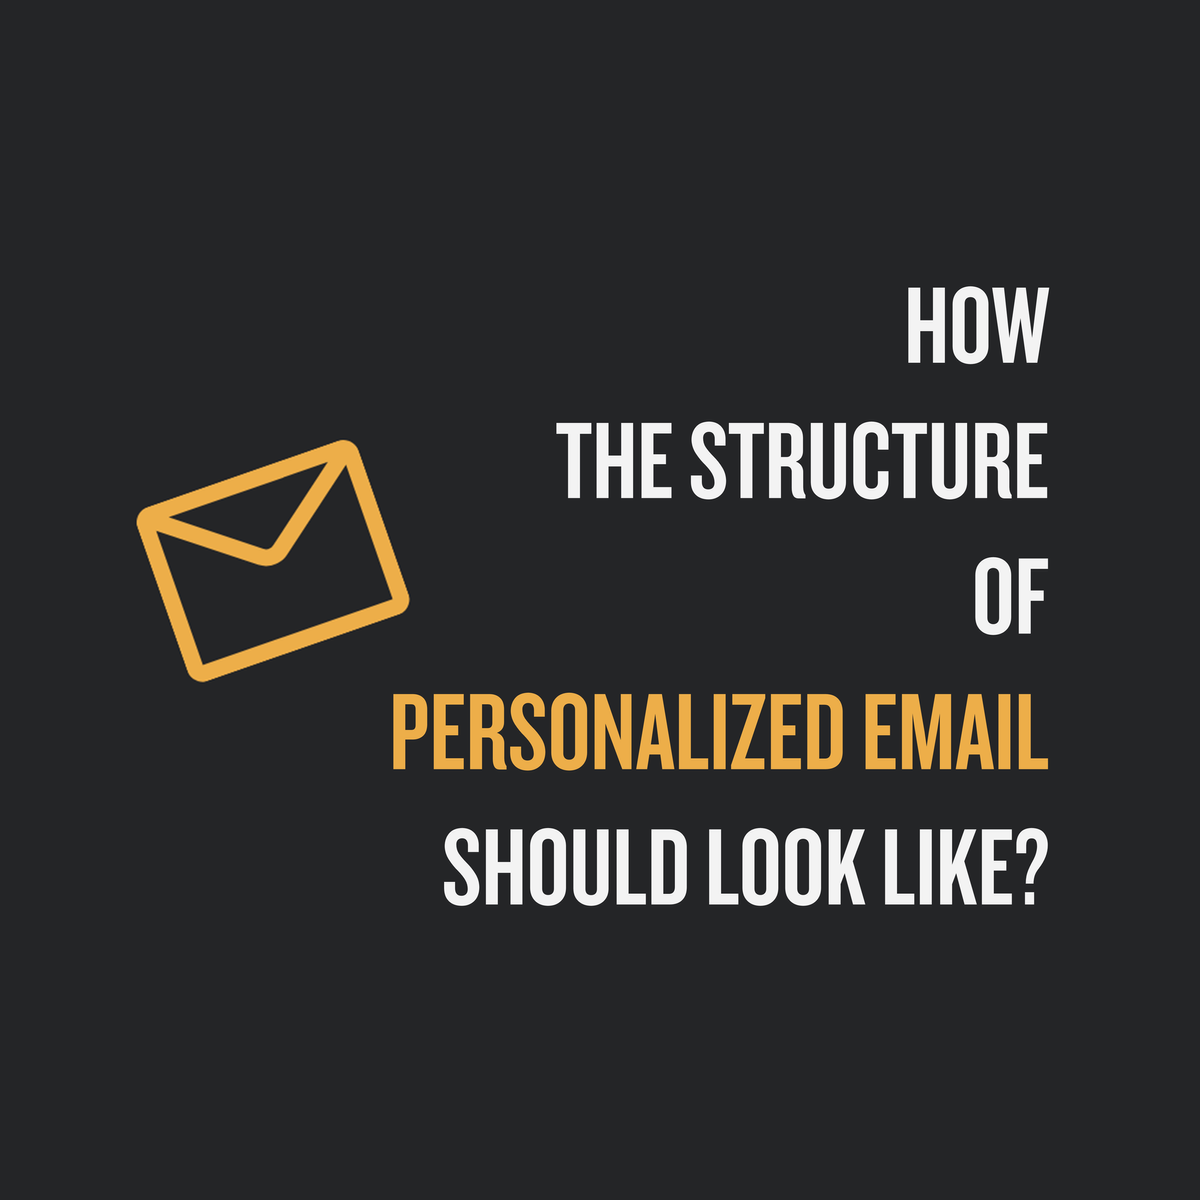 How The Structure Of Personalized Emails Should Look Like?